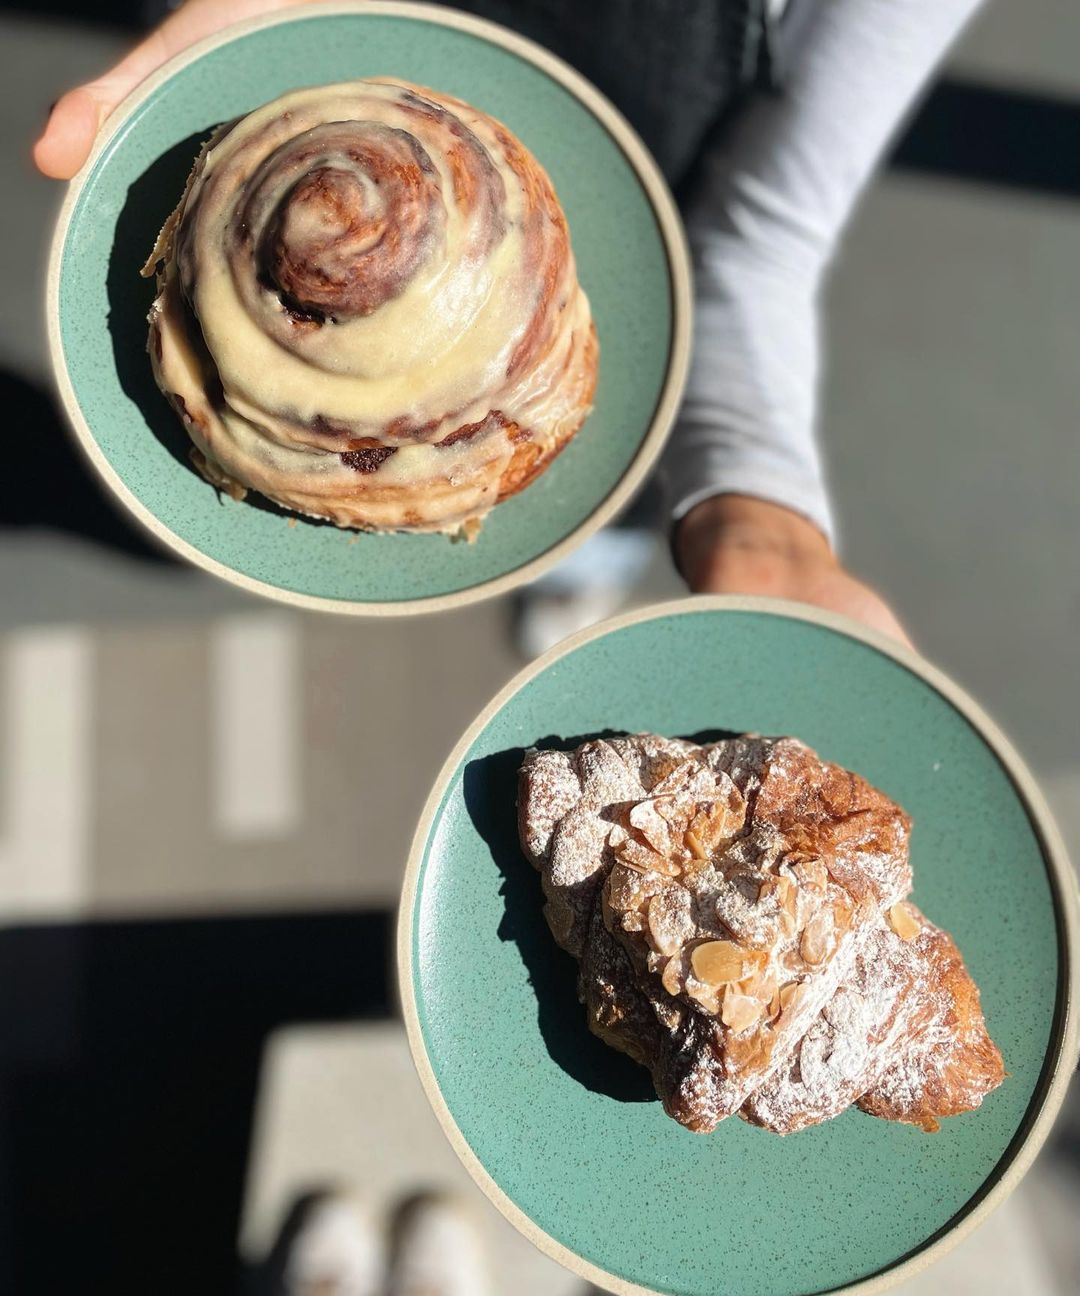 an almond croissant and an escargot on plates